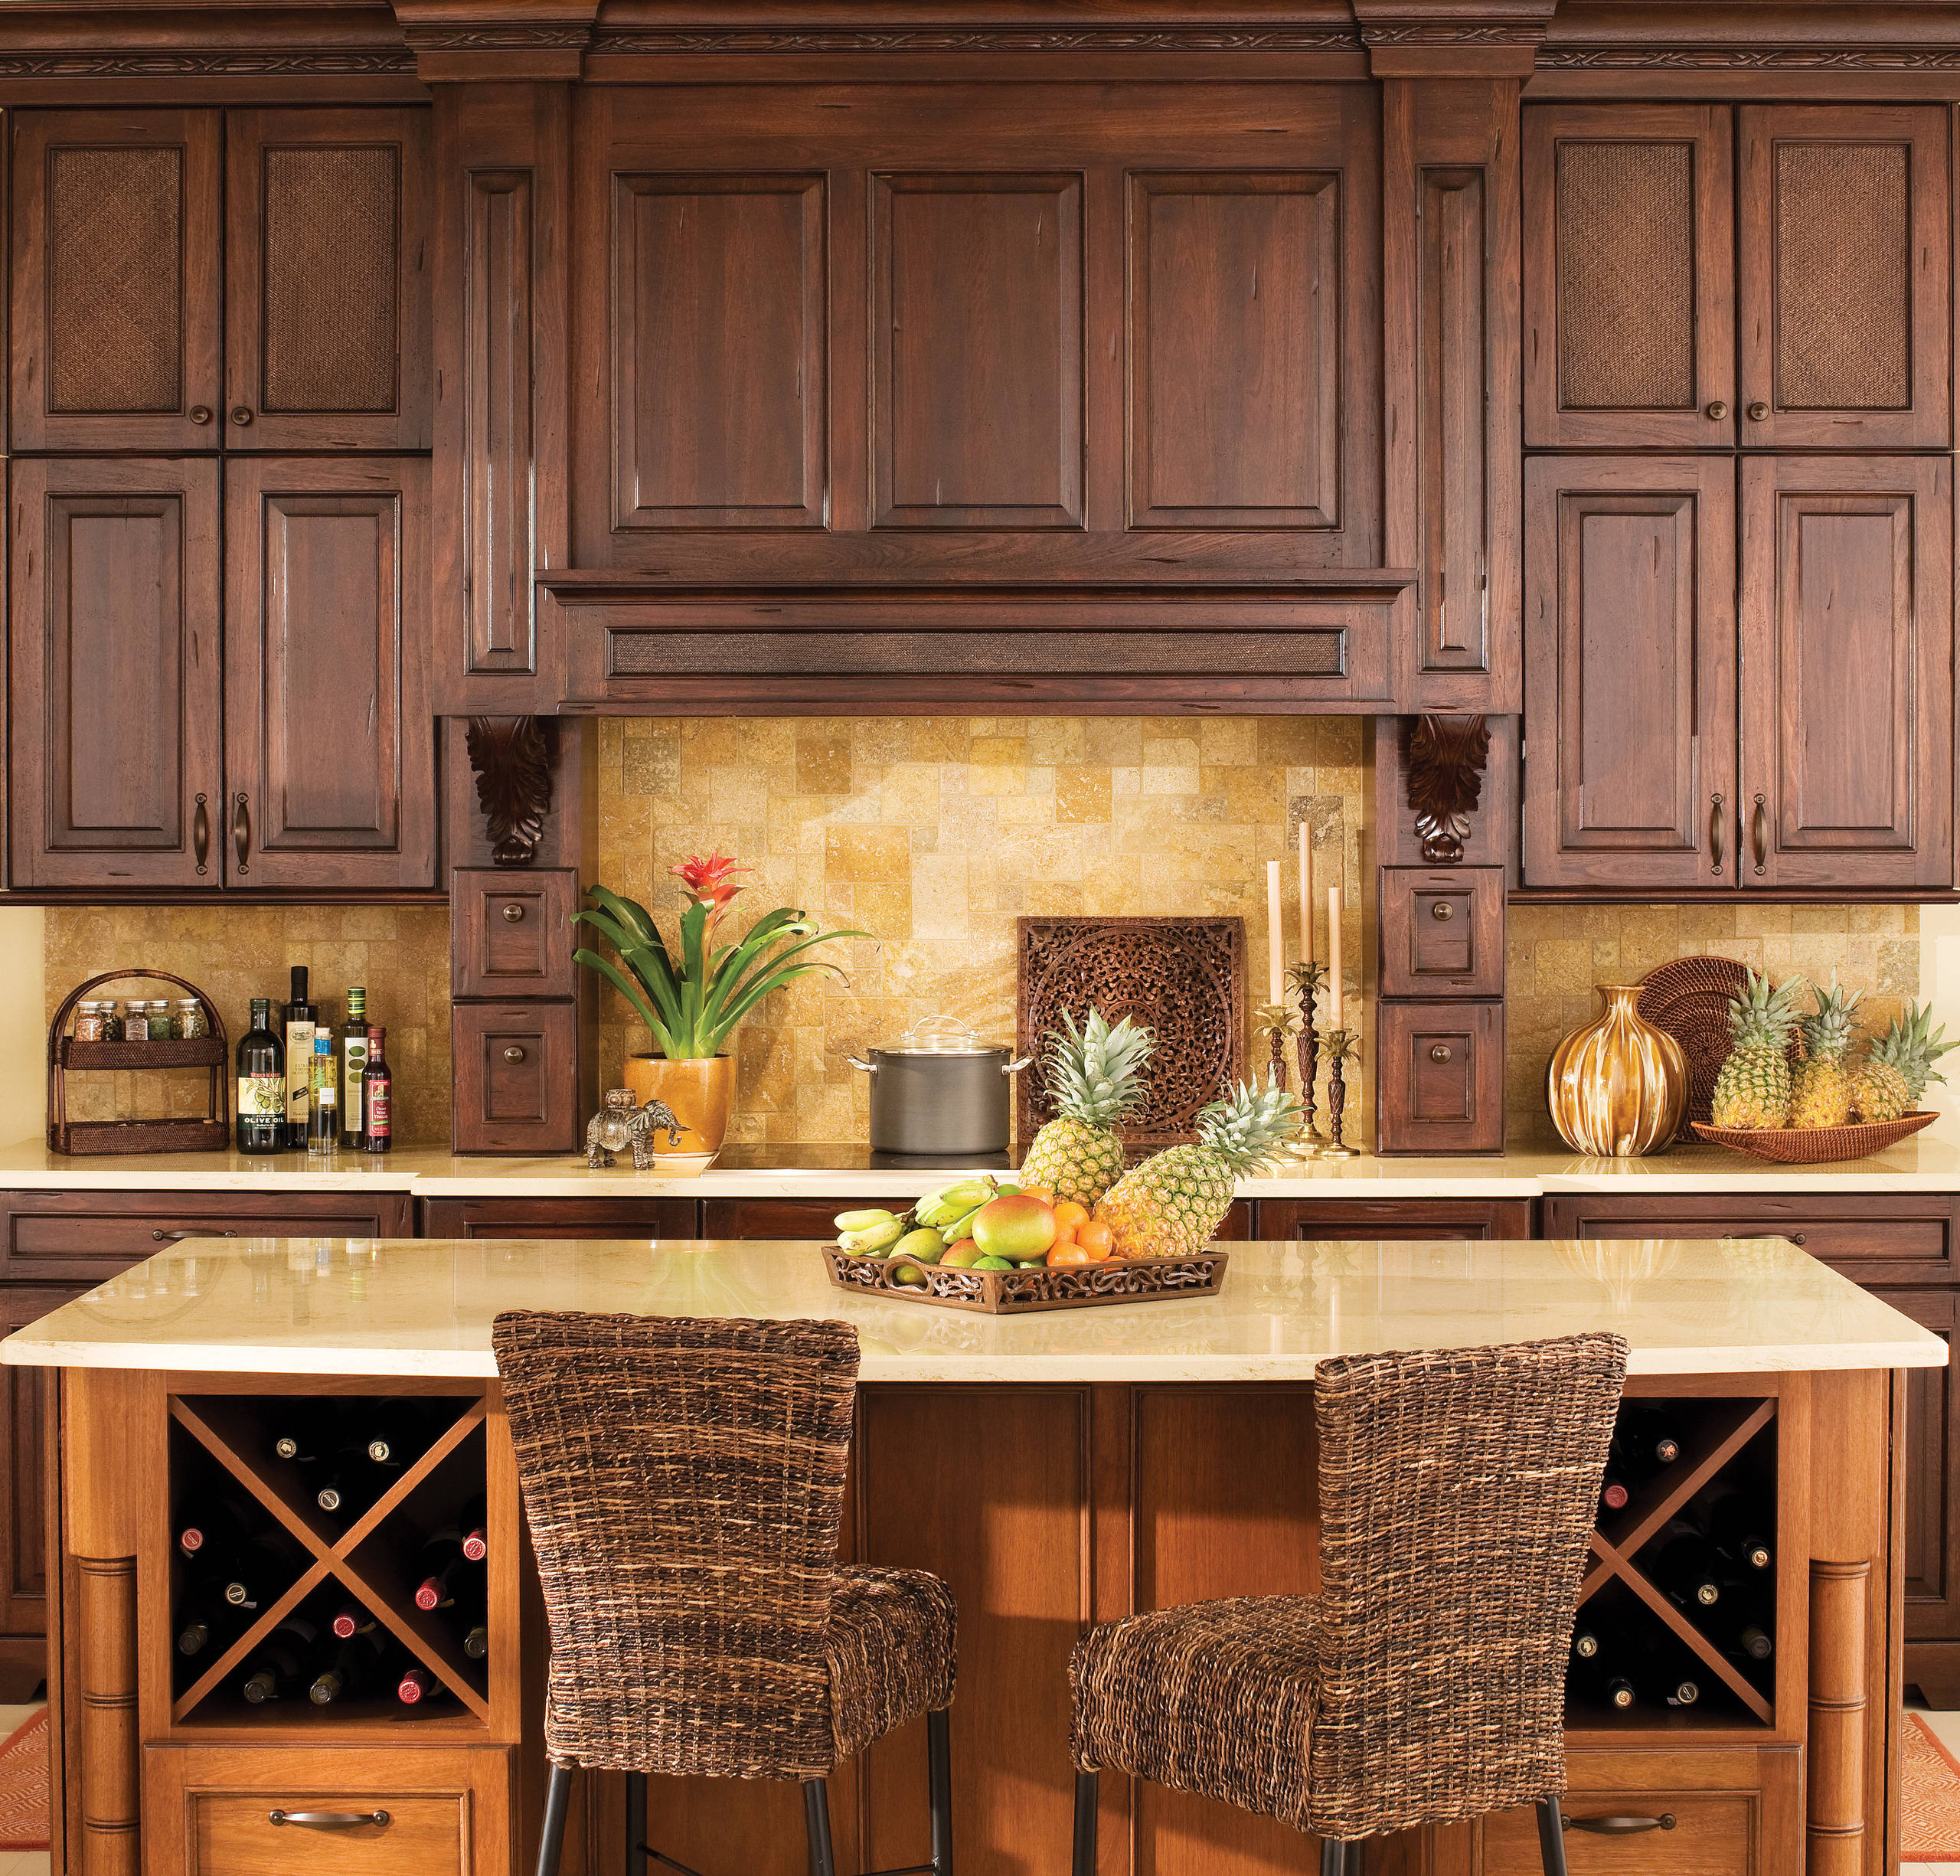 Jamaican Kitchen Cabinets - Kitchen Cupboards The National Housing